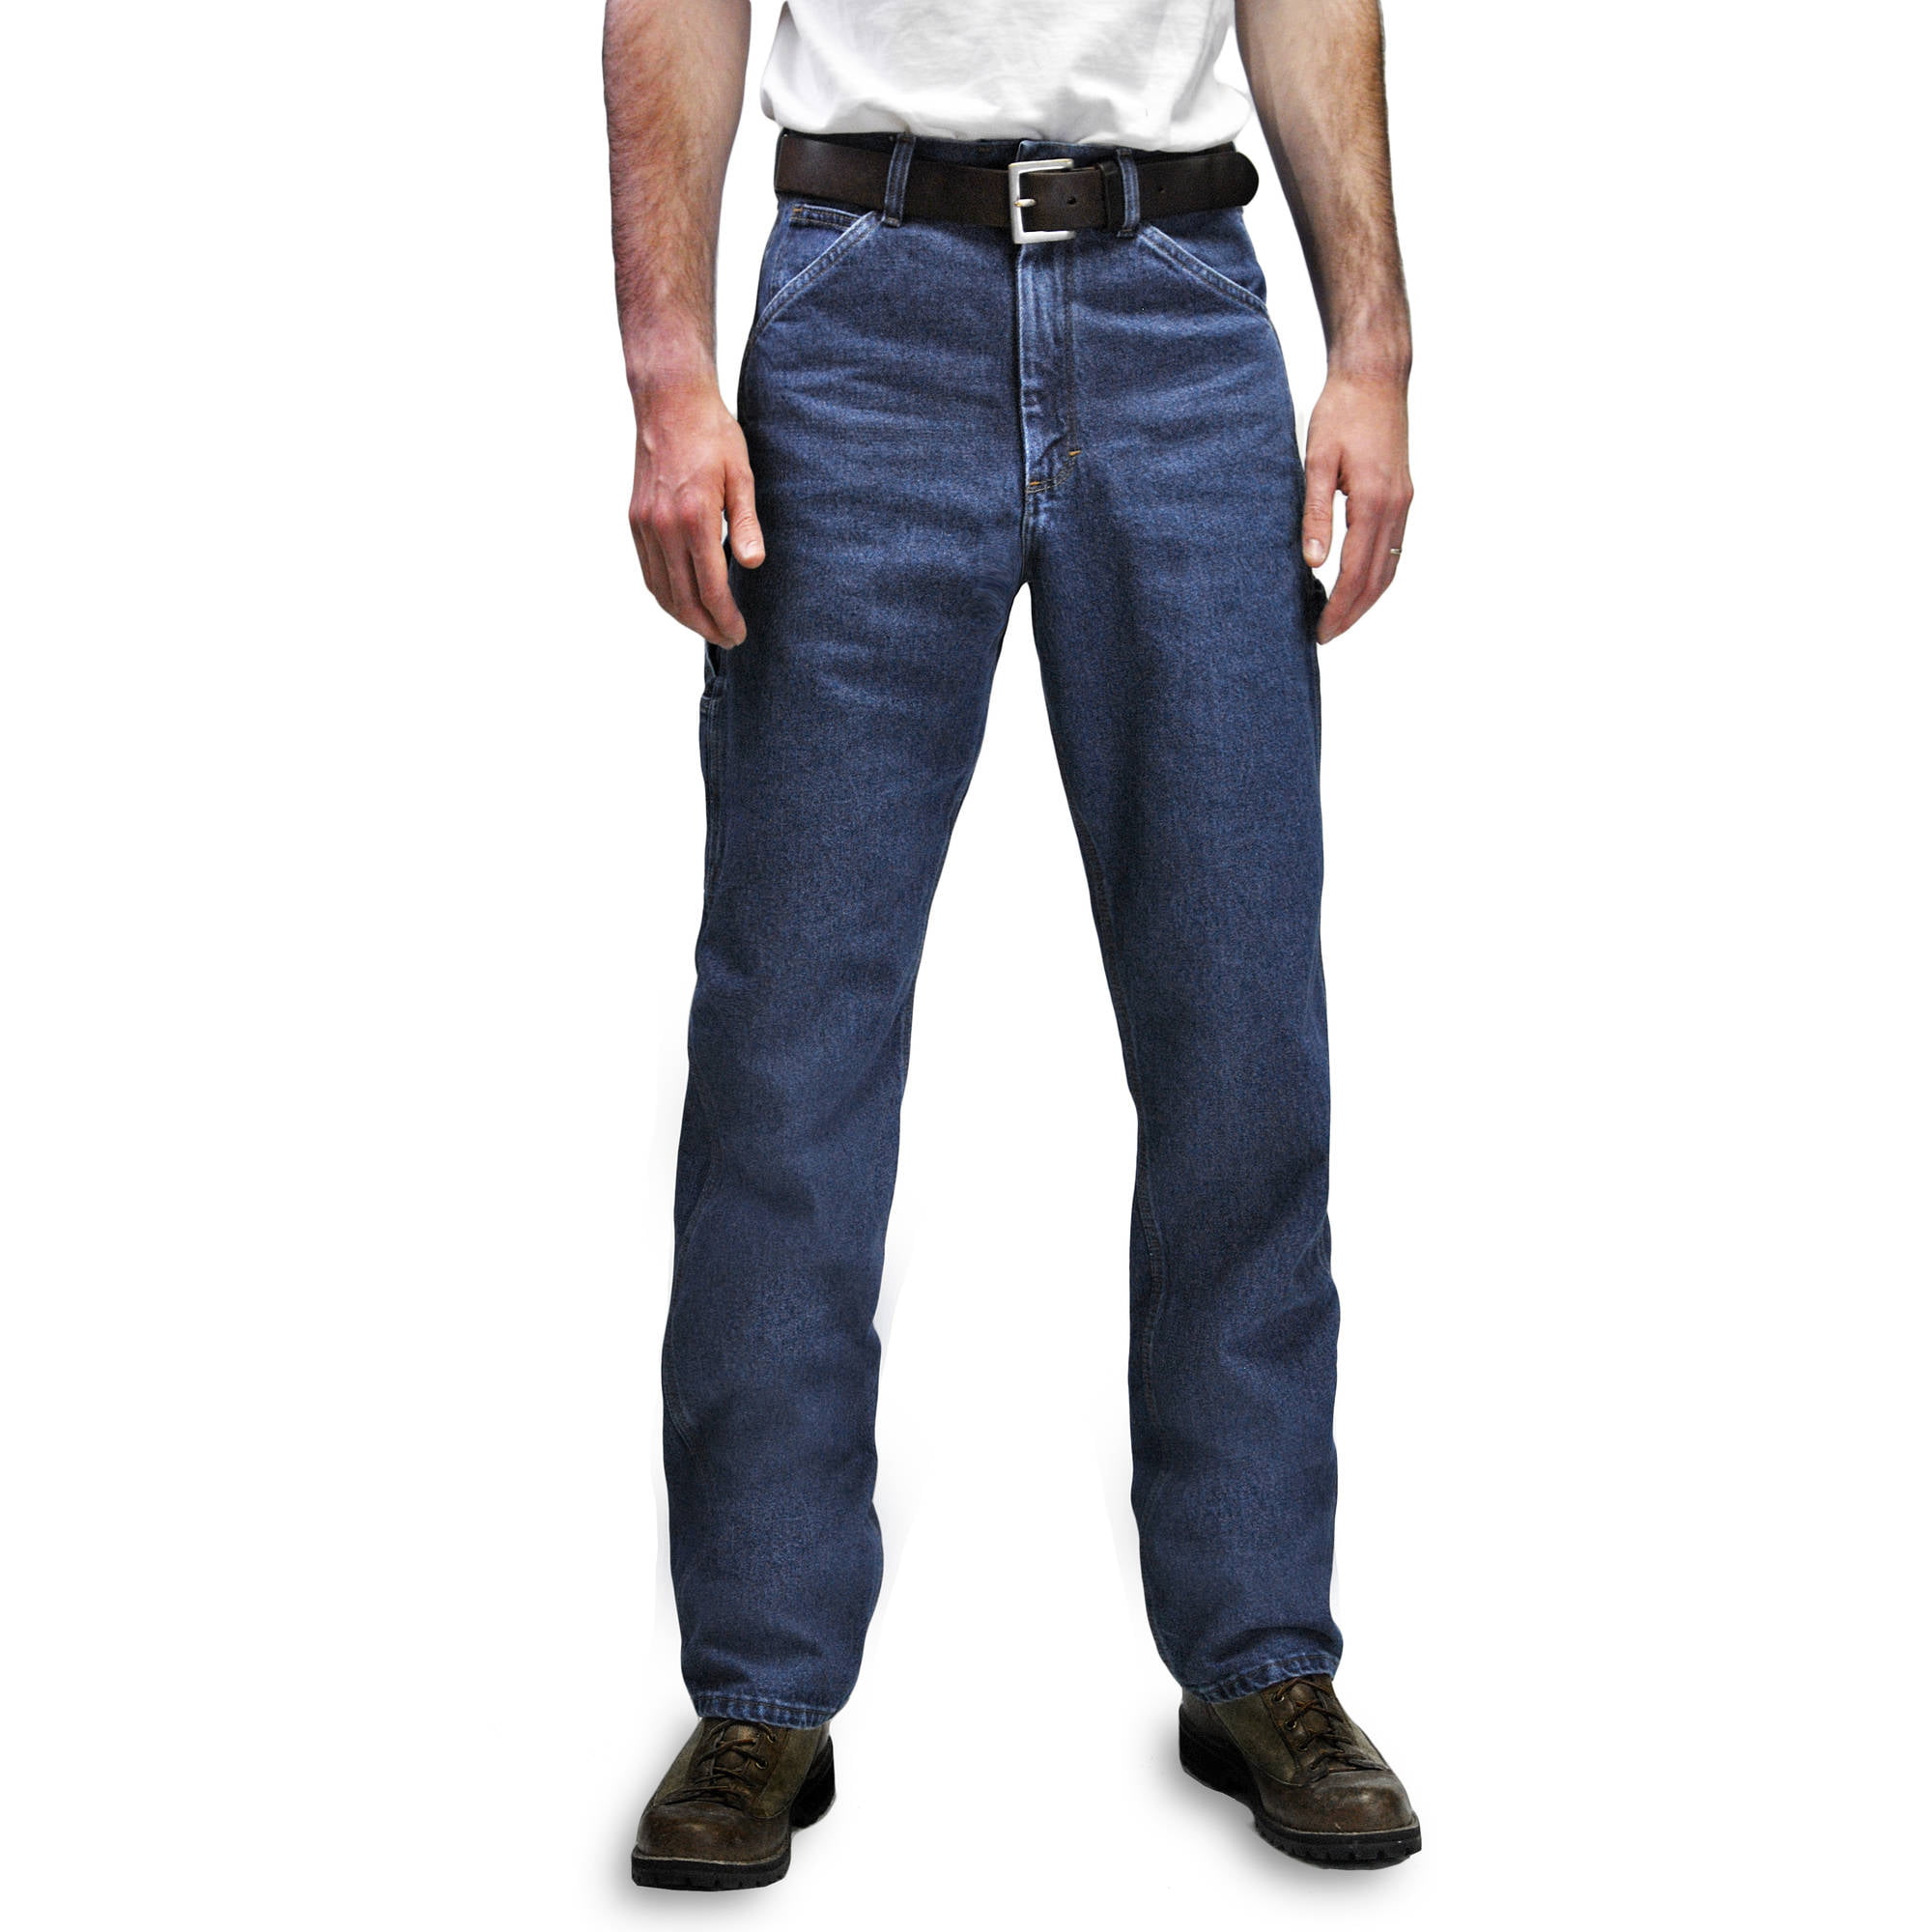 roundhouse jeans walmart